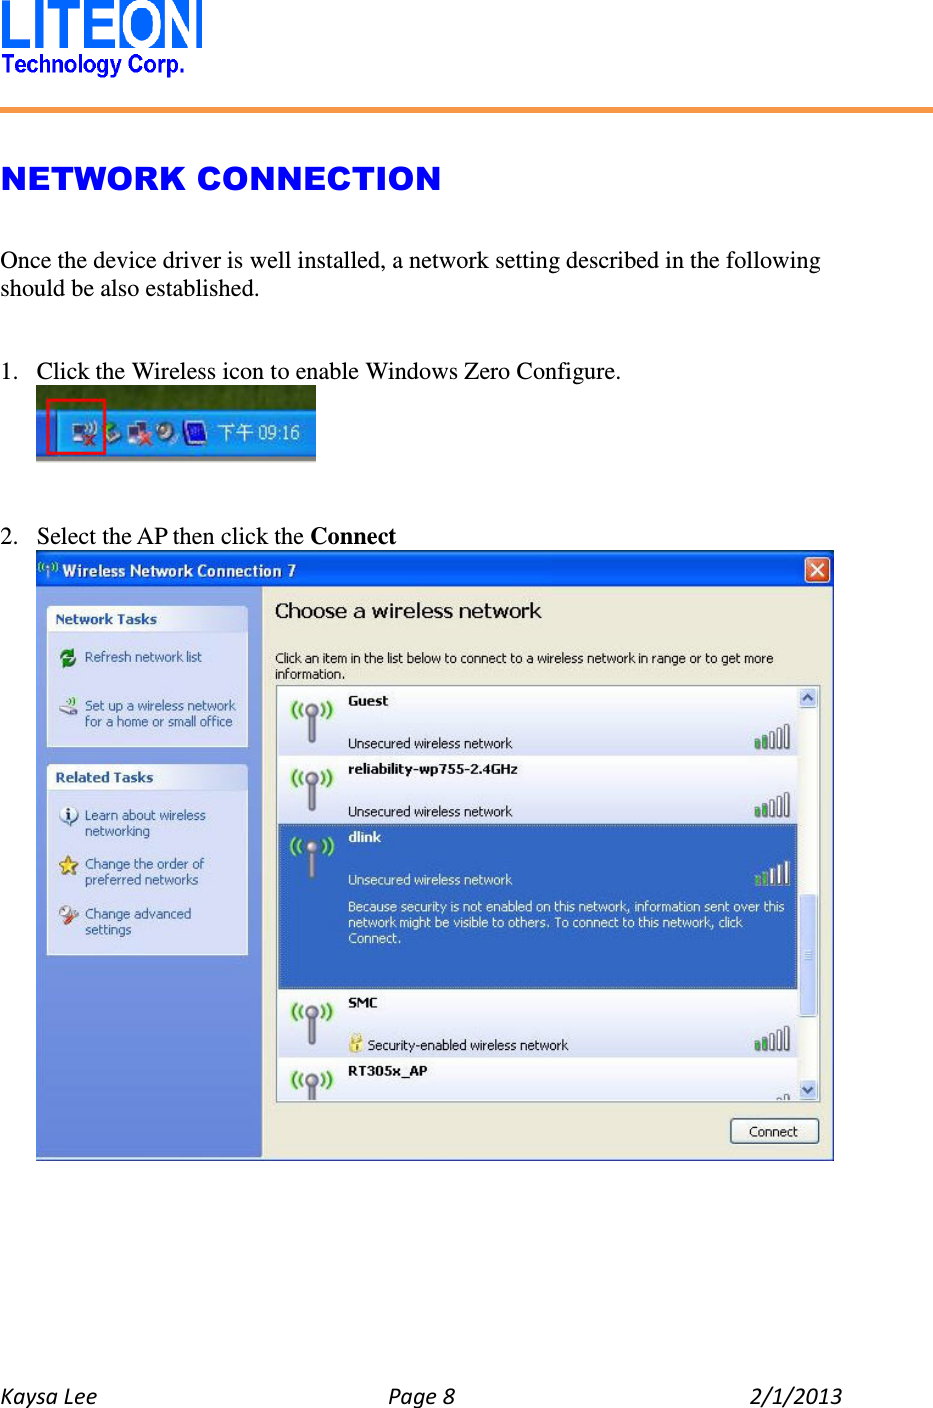   Kaysa Lee  Page 8  2/1/2013    NETWORK CONNECTION  Once the device driver is well installed, a network setting described in the following should be also established.   1. Click the Wireless icon to enable Windows Zero Configure.    2. Select the AP then click the Connect  